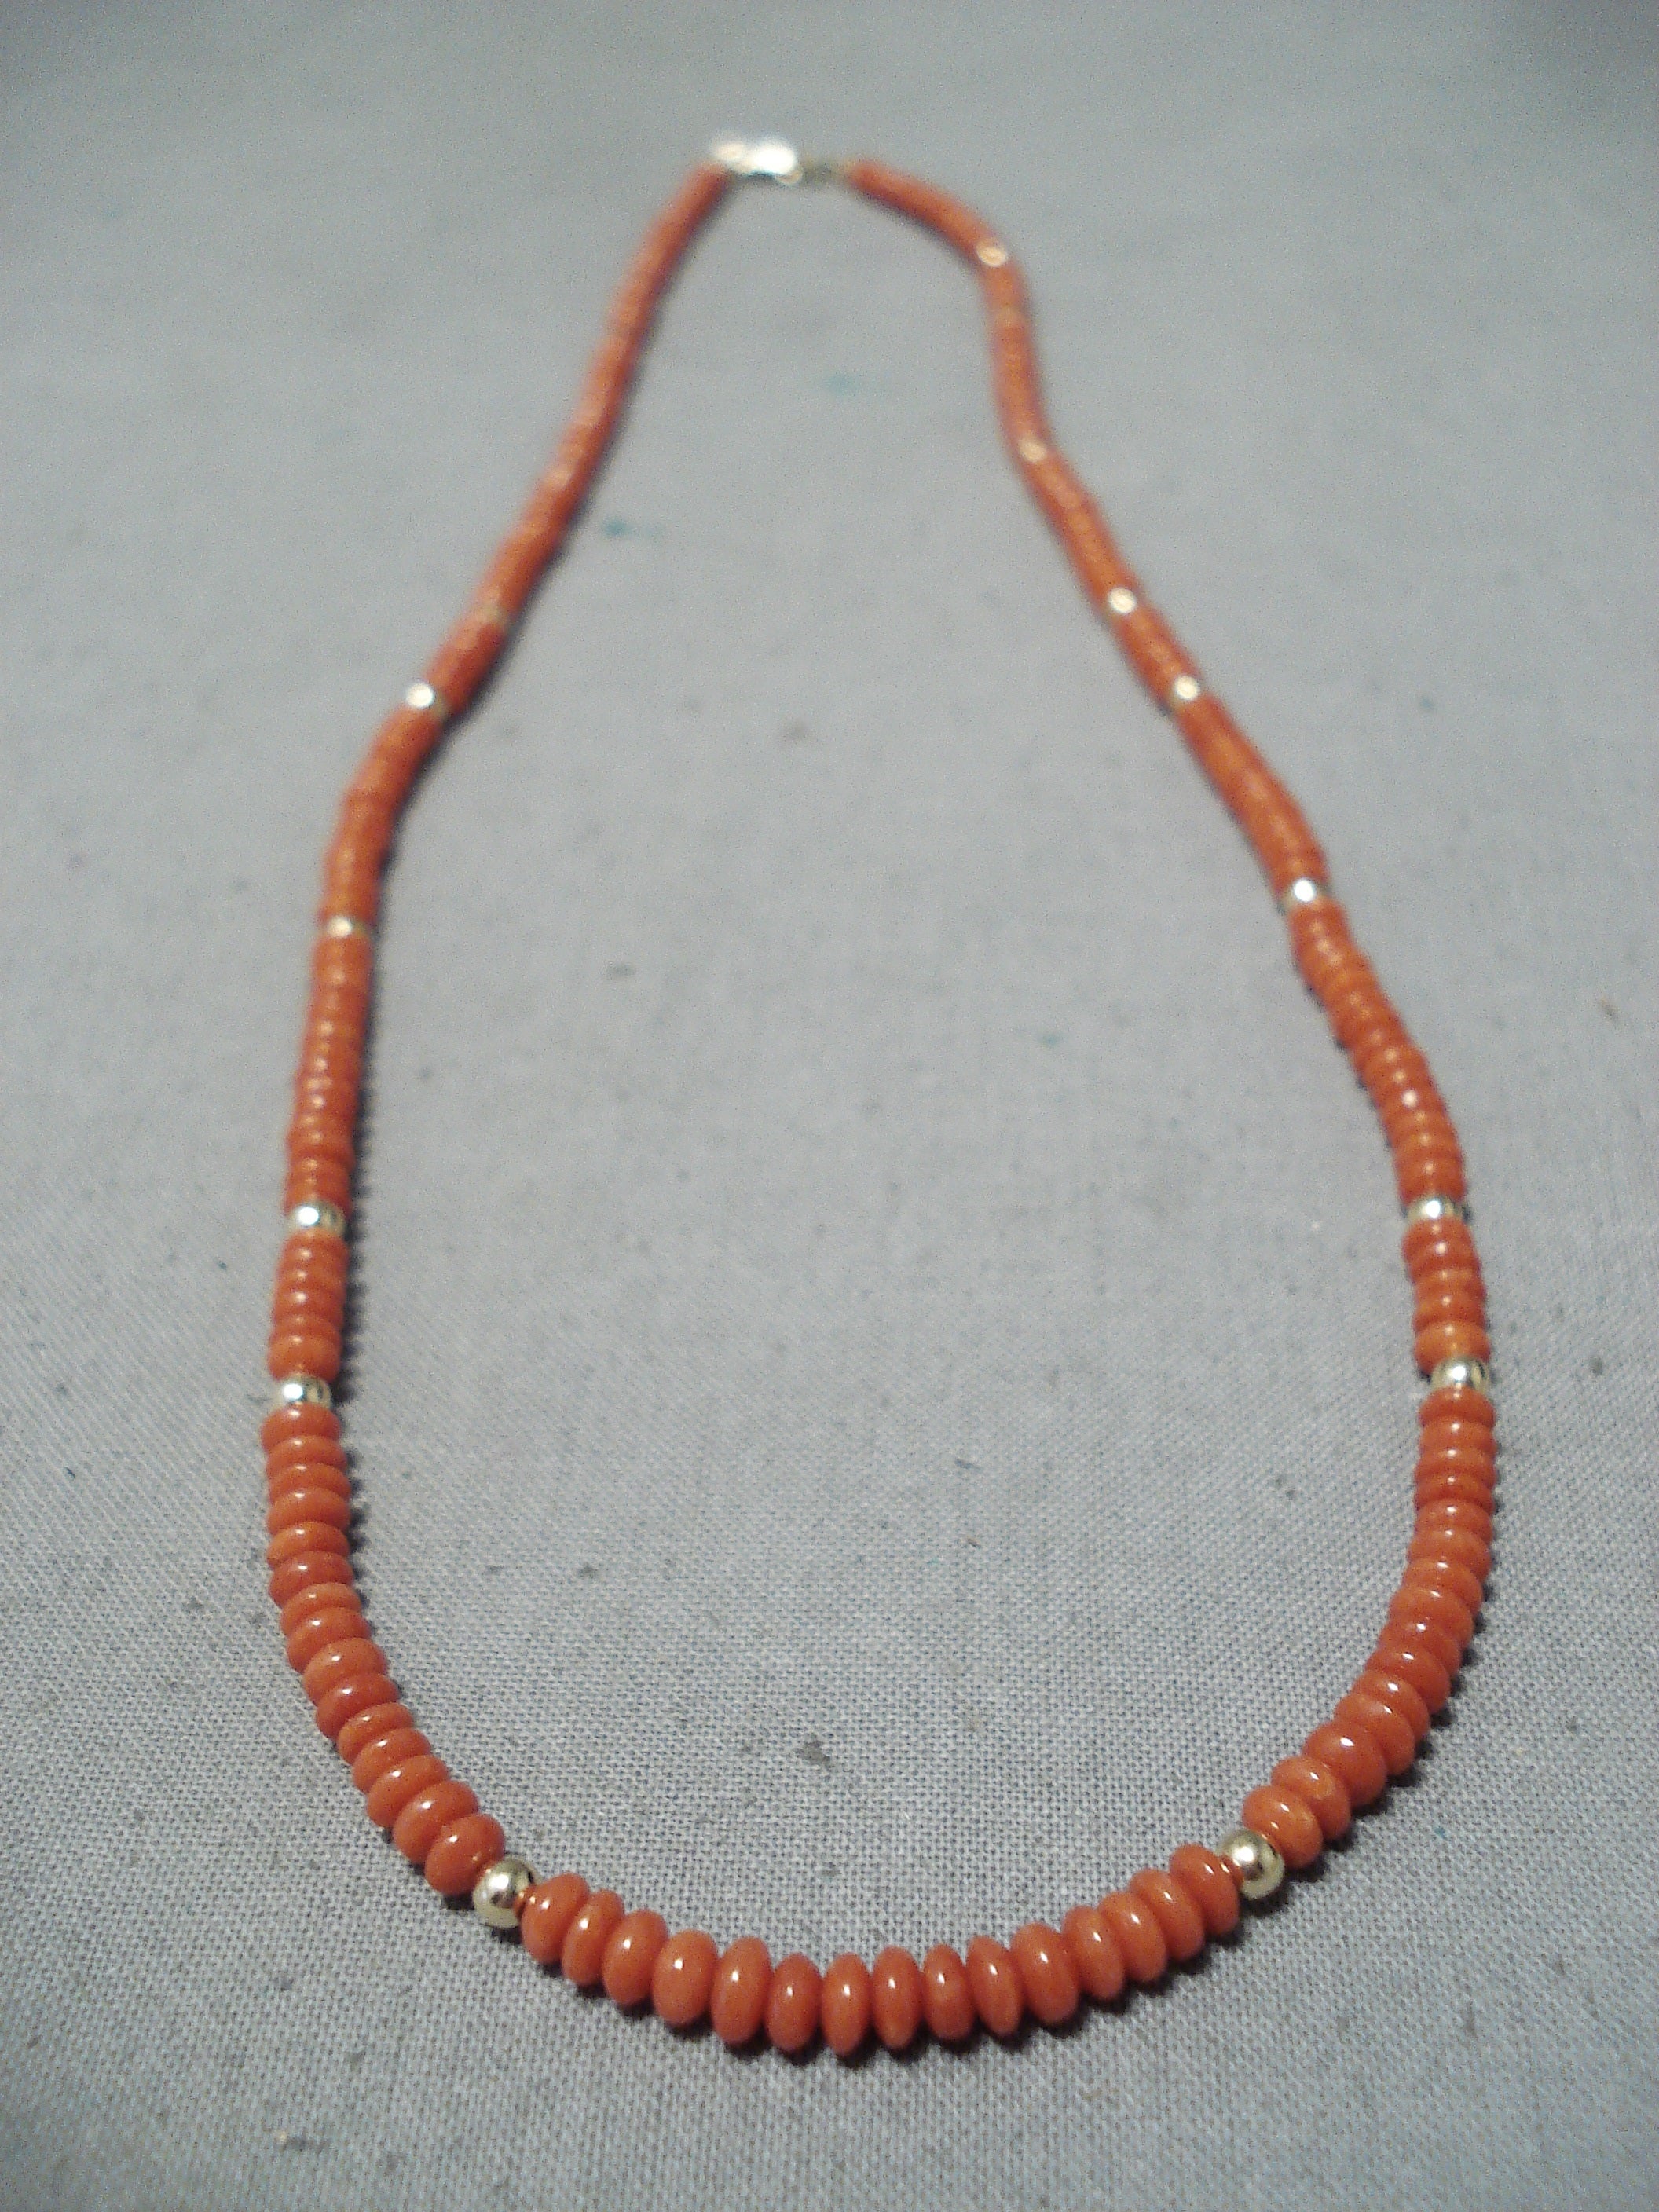 Amazon.com: Coral Rondelles, Coral Beads, Faceted Coral, 6mm Beads, Pink Coral  Necklace, 15 Inch Strand : Arts, Crafts & Sewing